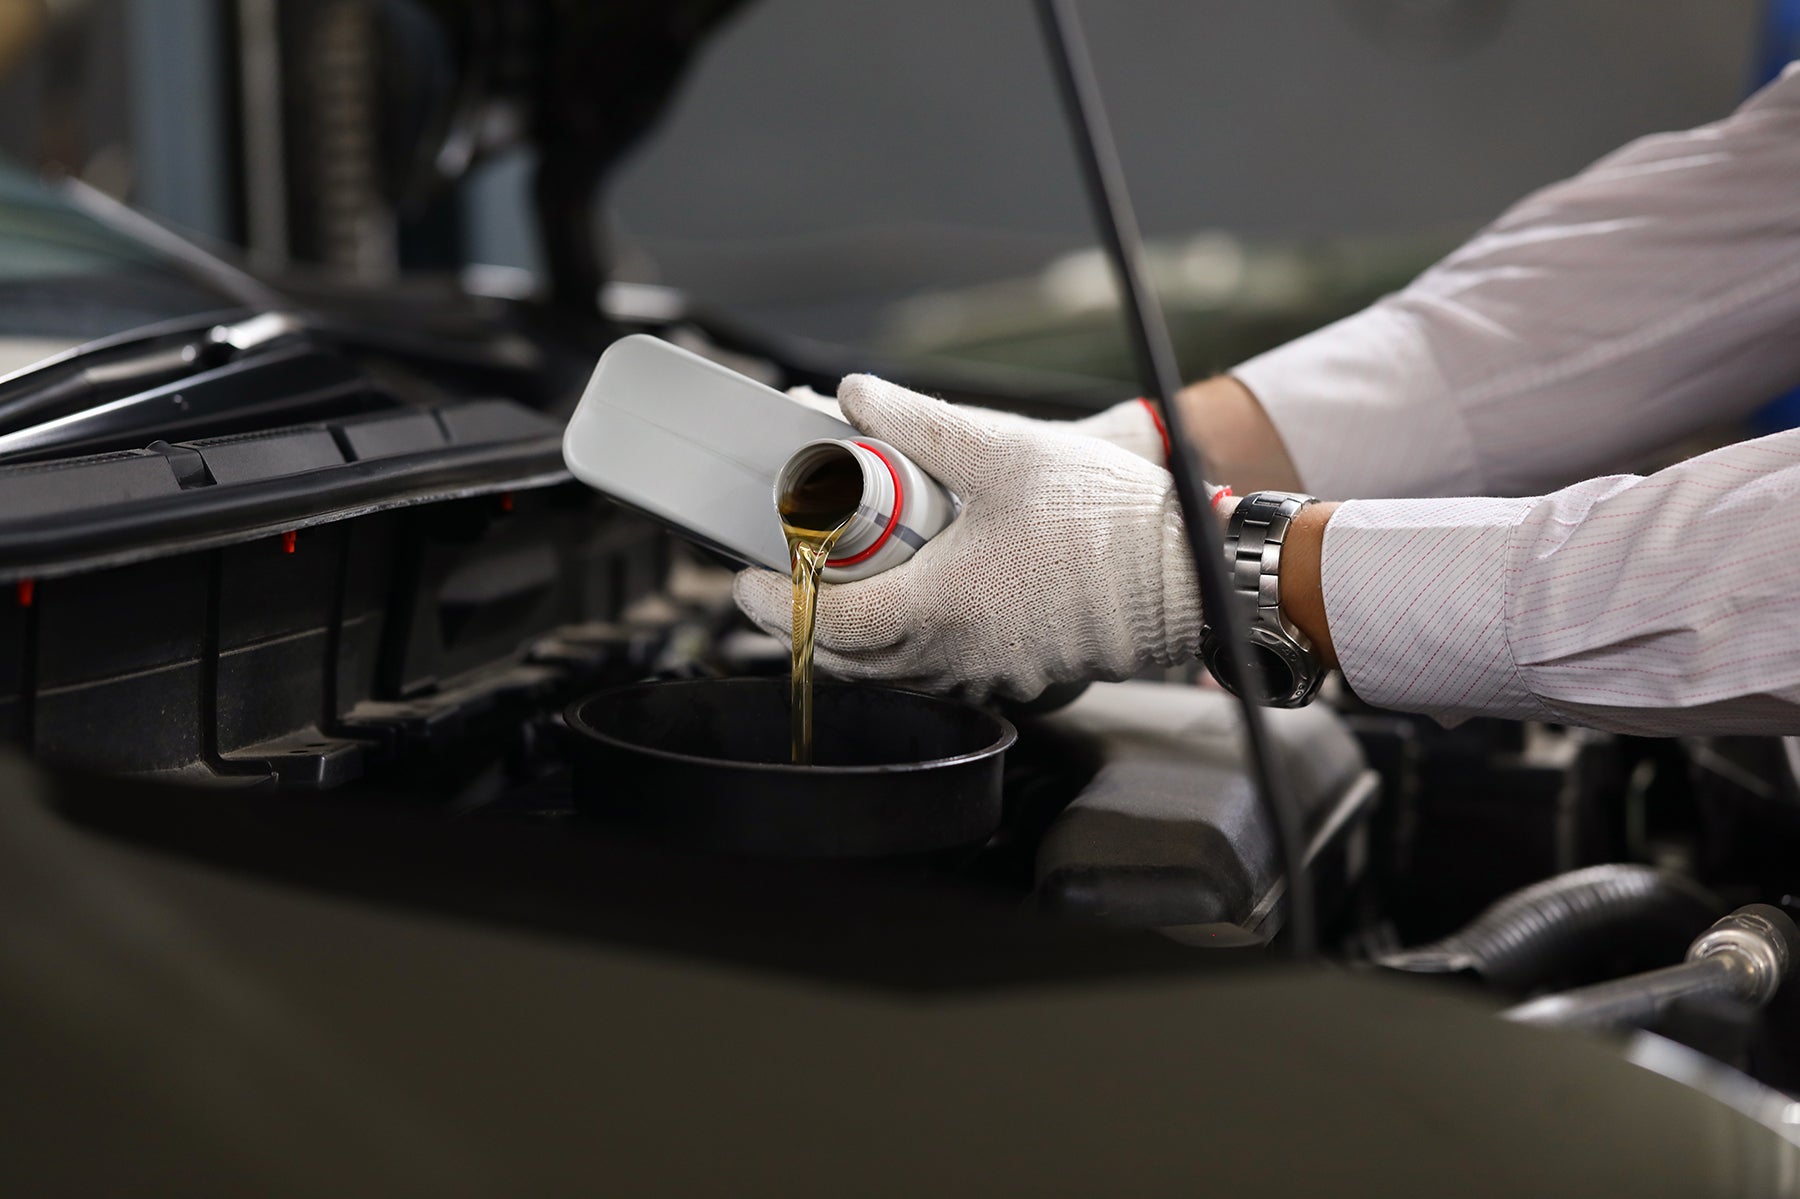 Difference between synthetic oil & conventional oil at Bennett Toyota | Toyota mechanic refilling oil in a Toyota vehicle